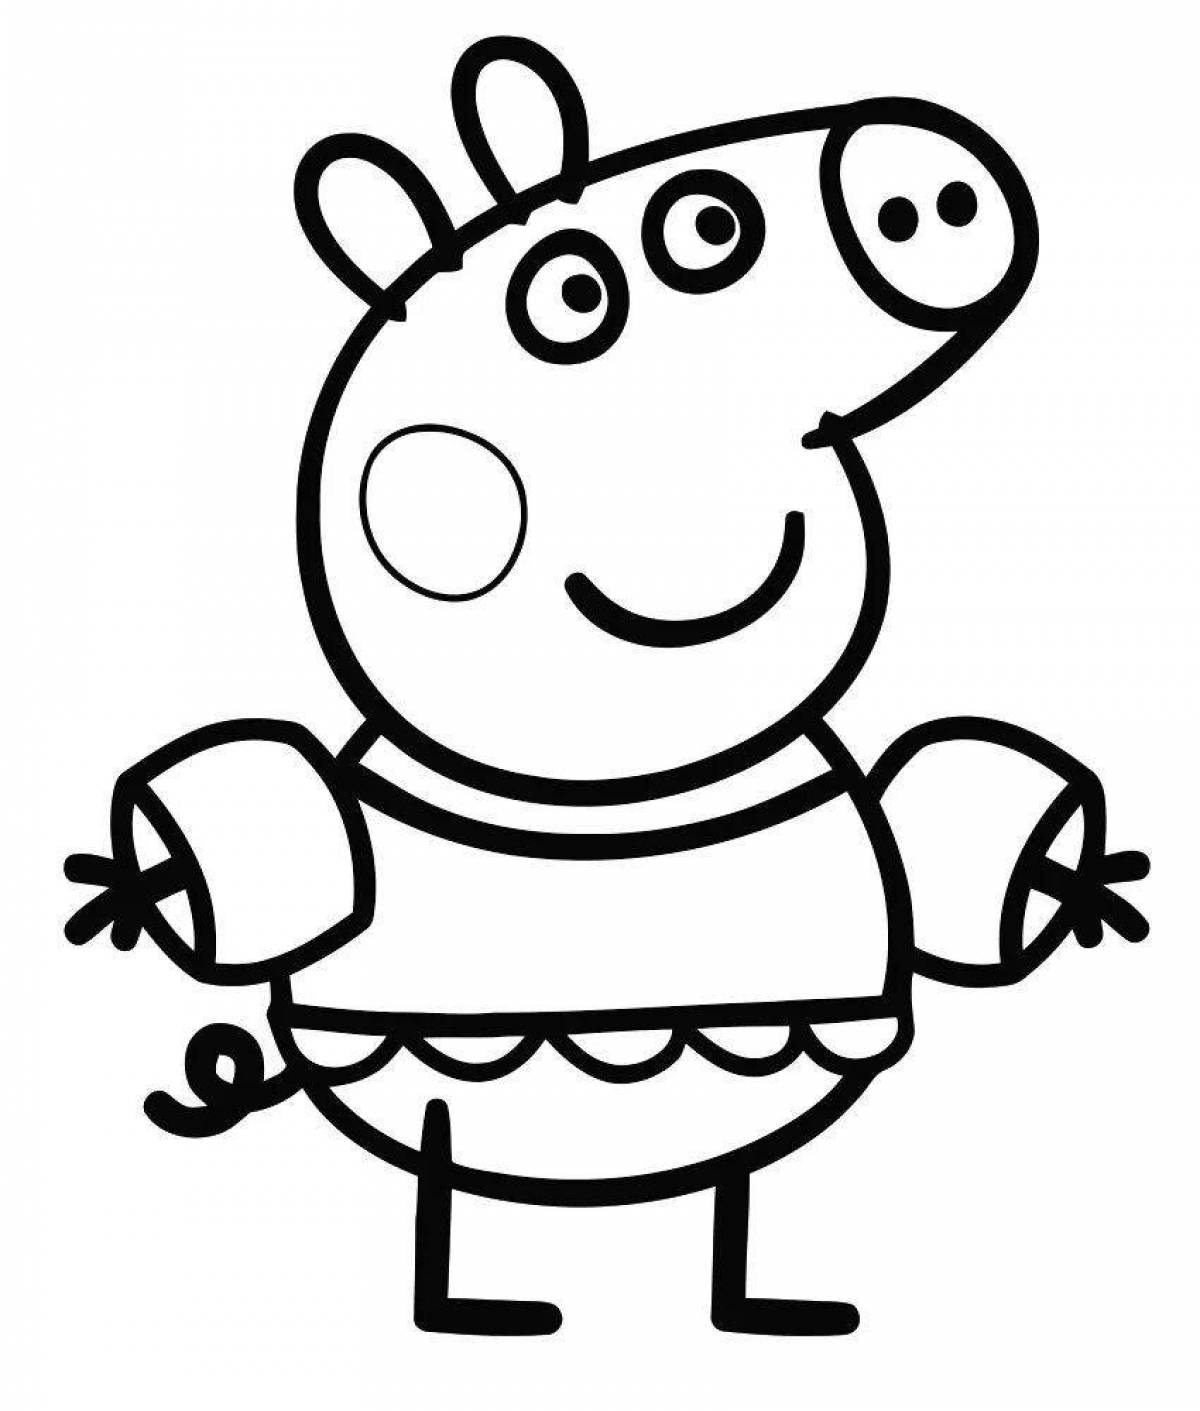 Fancy peppa pig coloring pages for kids